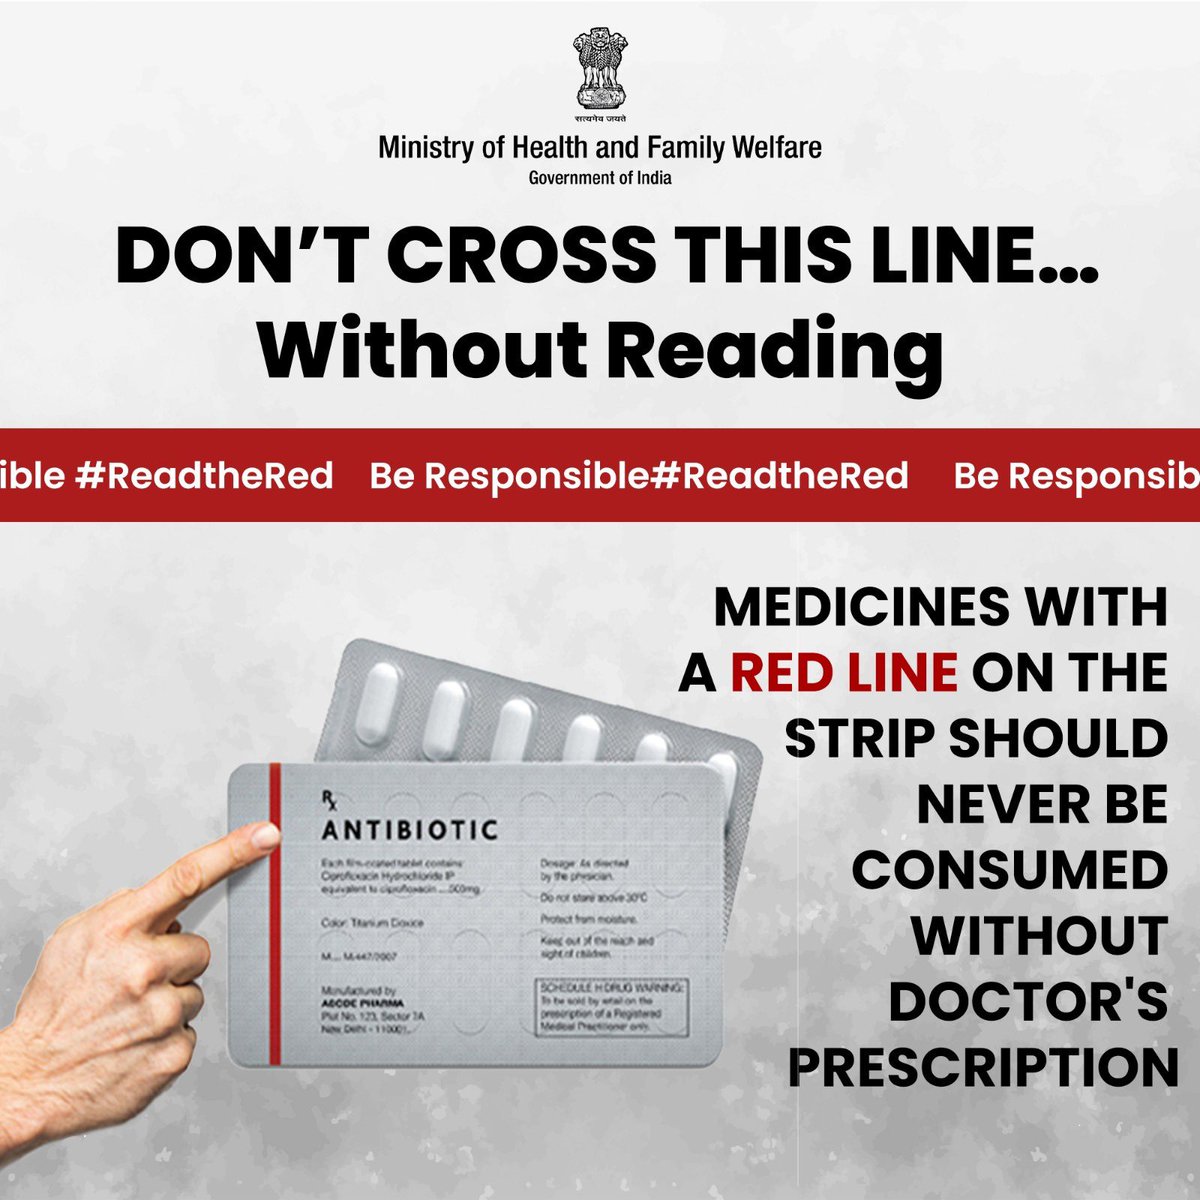 Red line, red alert! Don't ignore the red line on your meds. Consult your doctor first. . . #ReadTheRead #BeResponsible